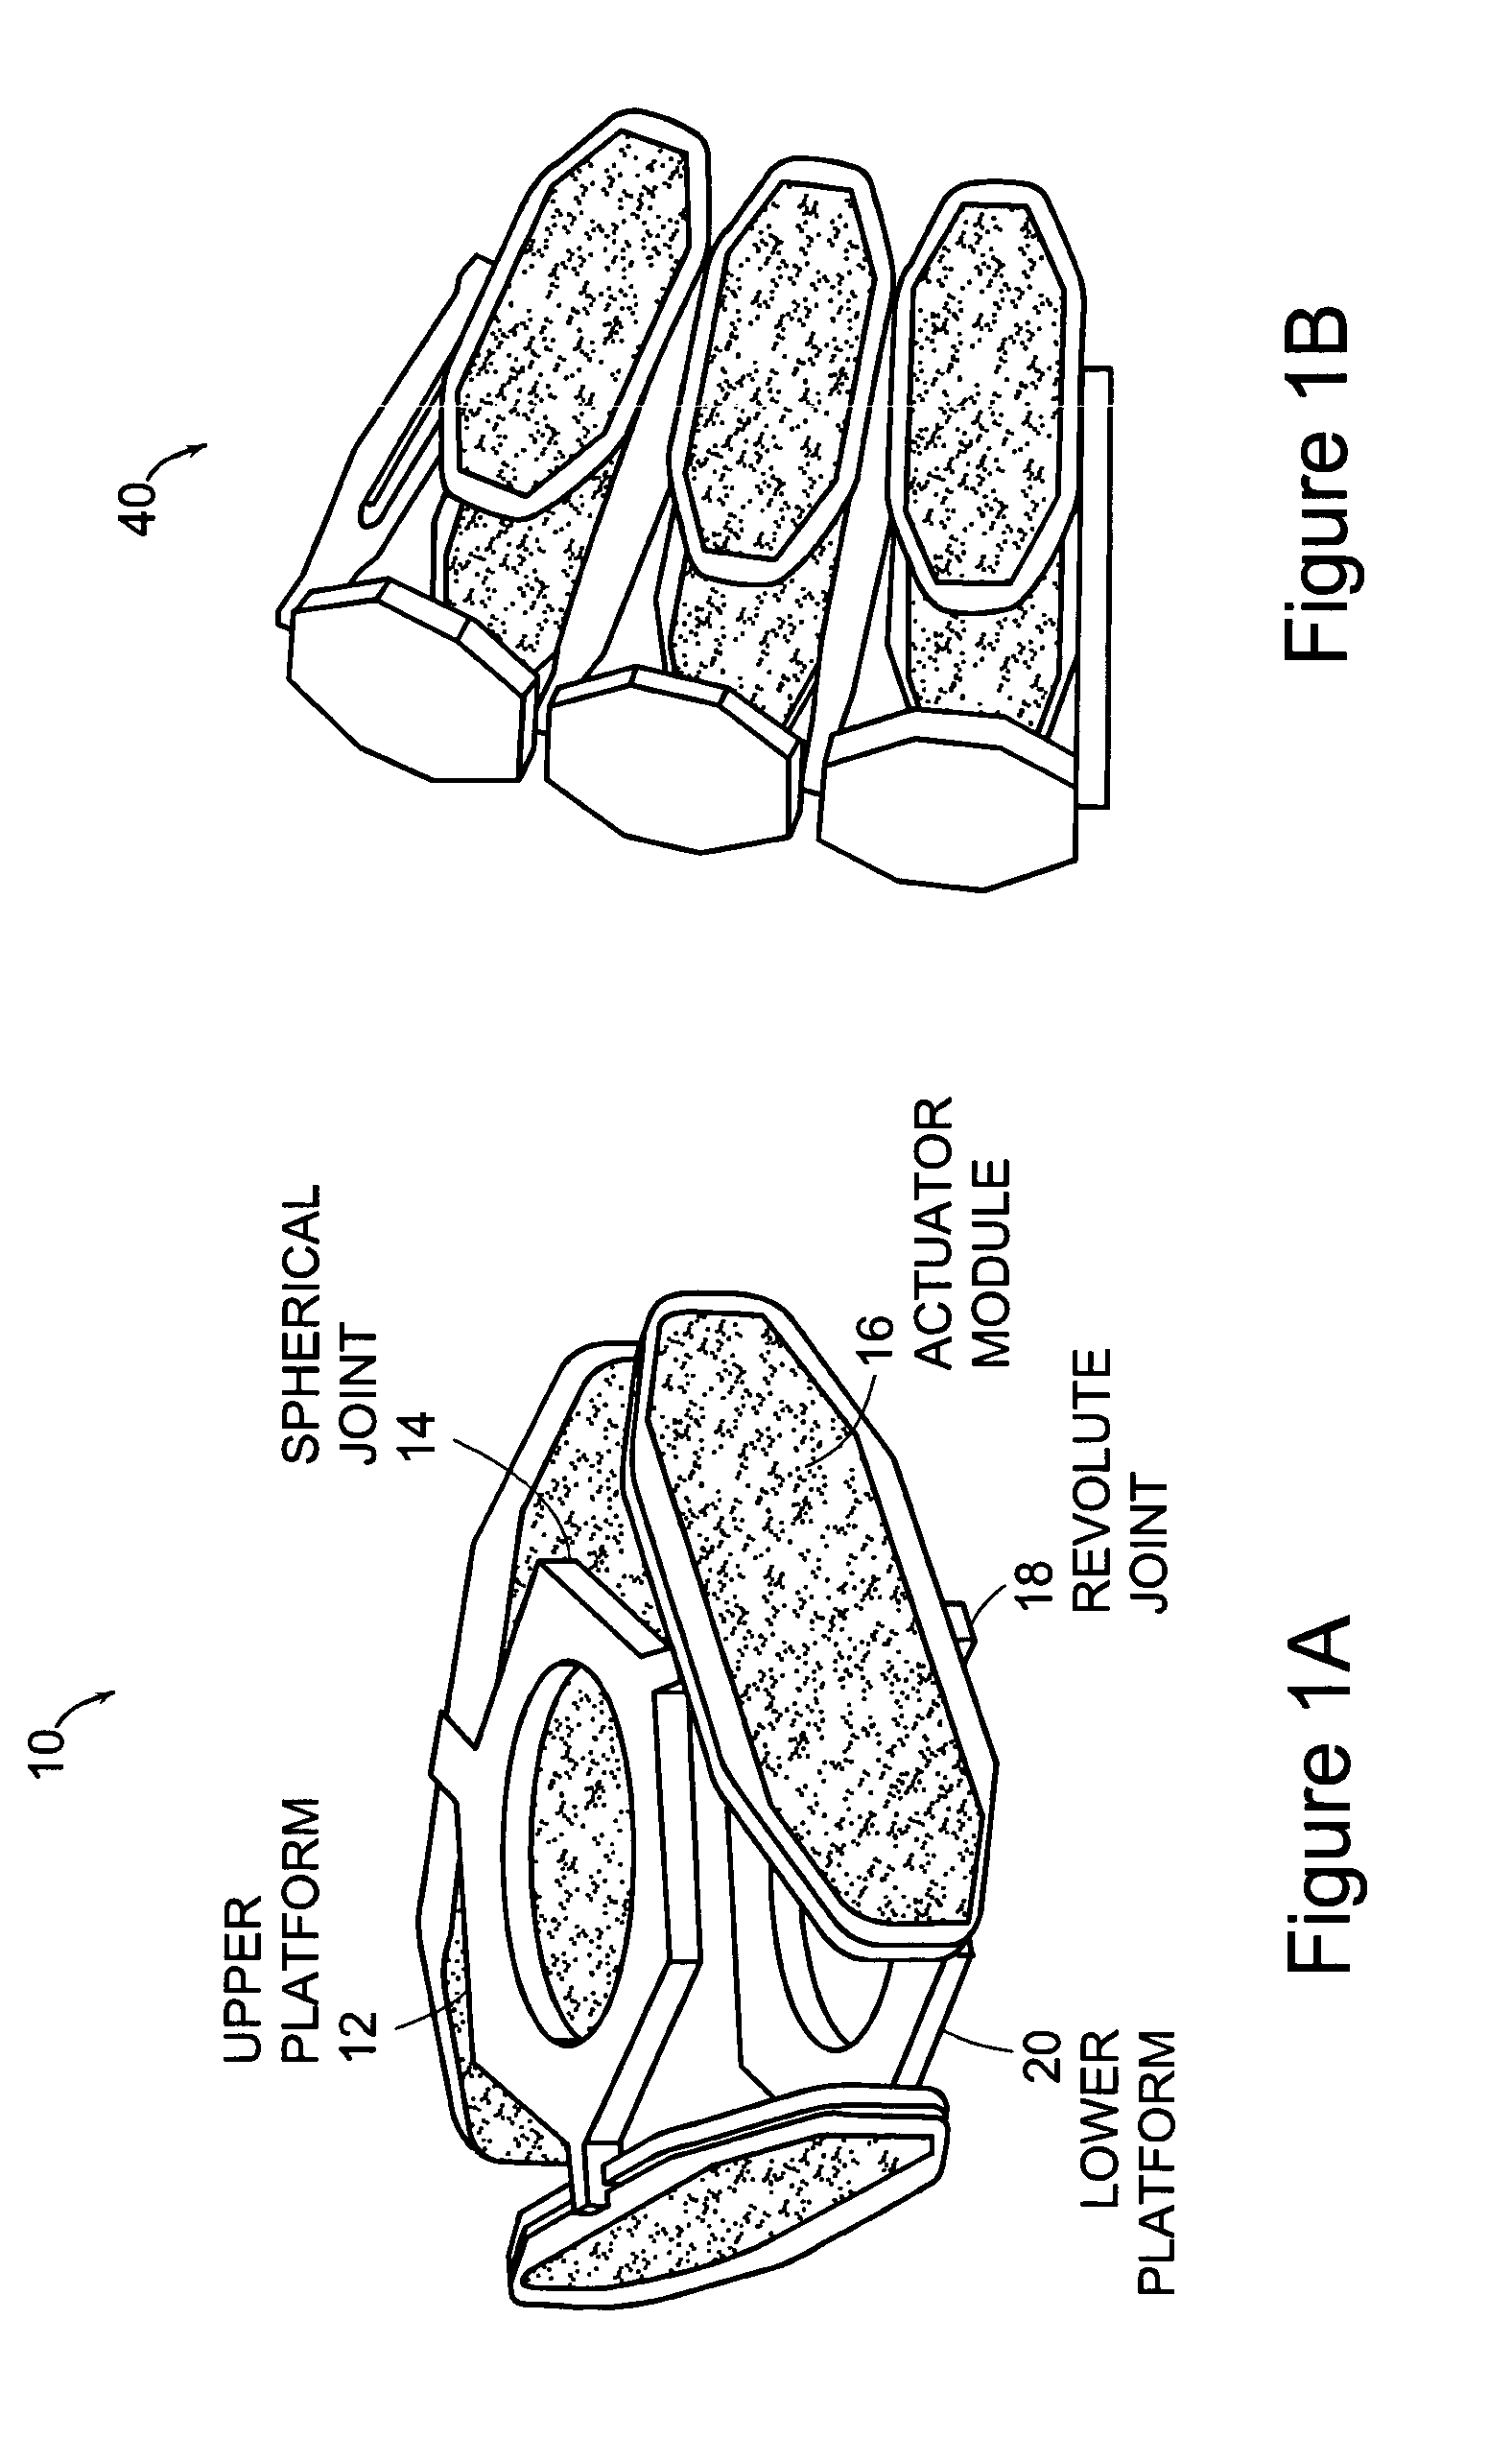 Dielectric elastomer actuated systems and methods